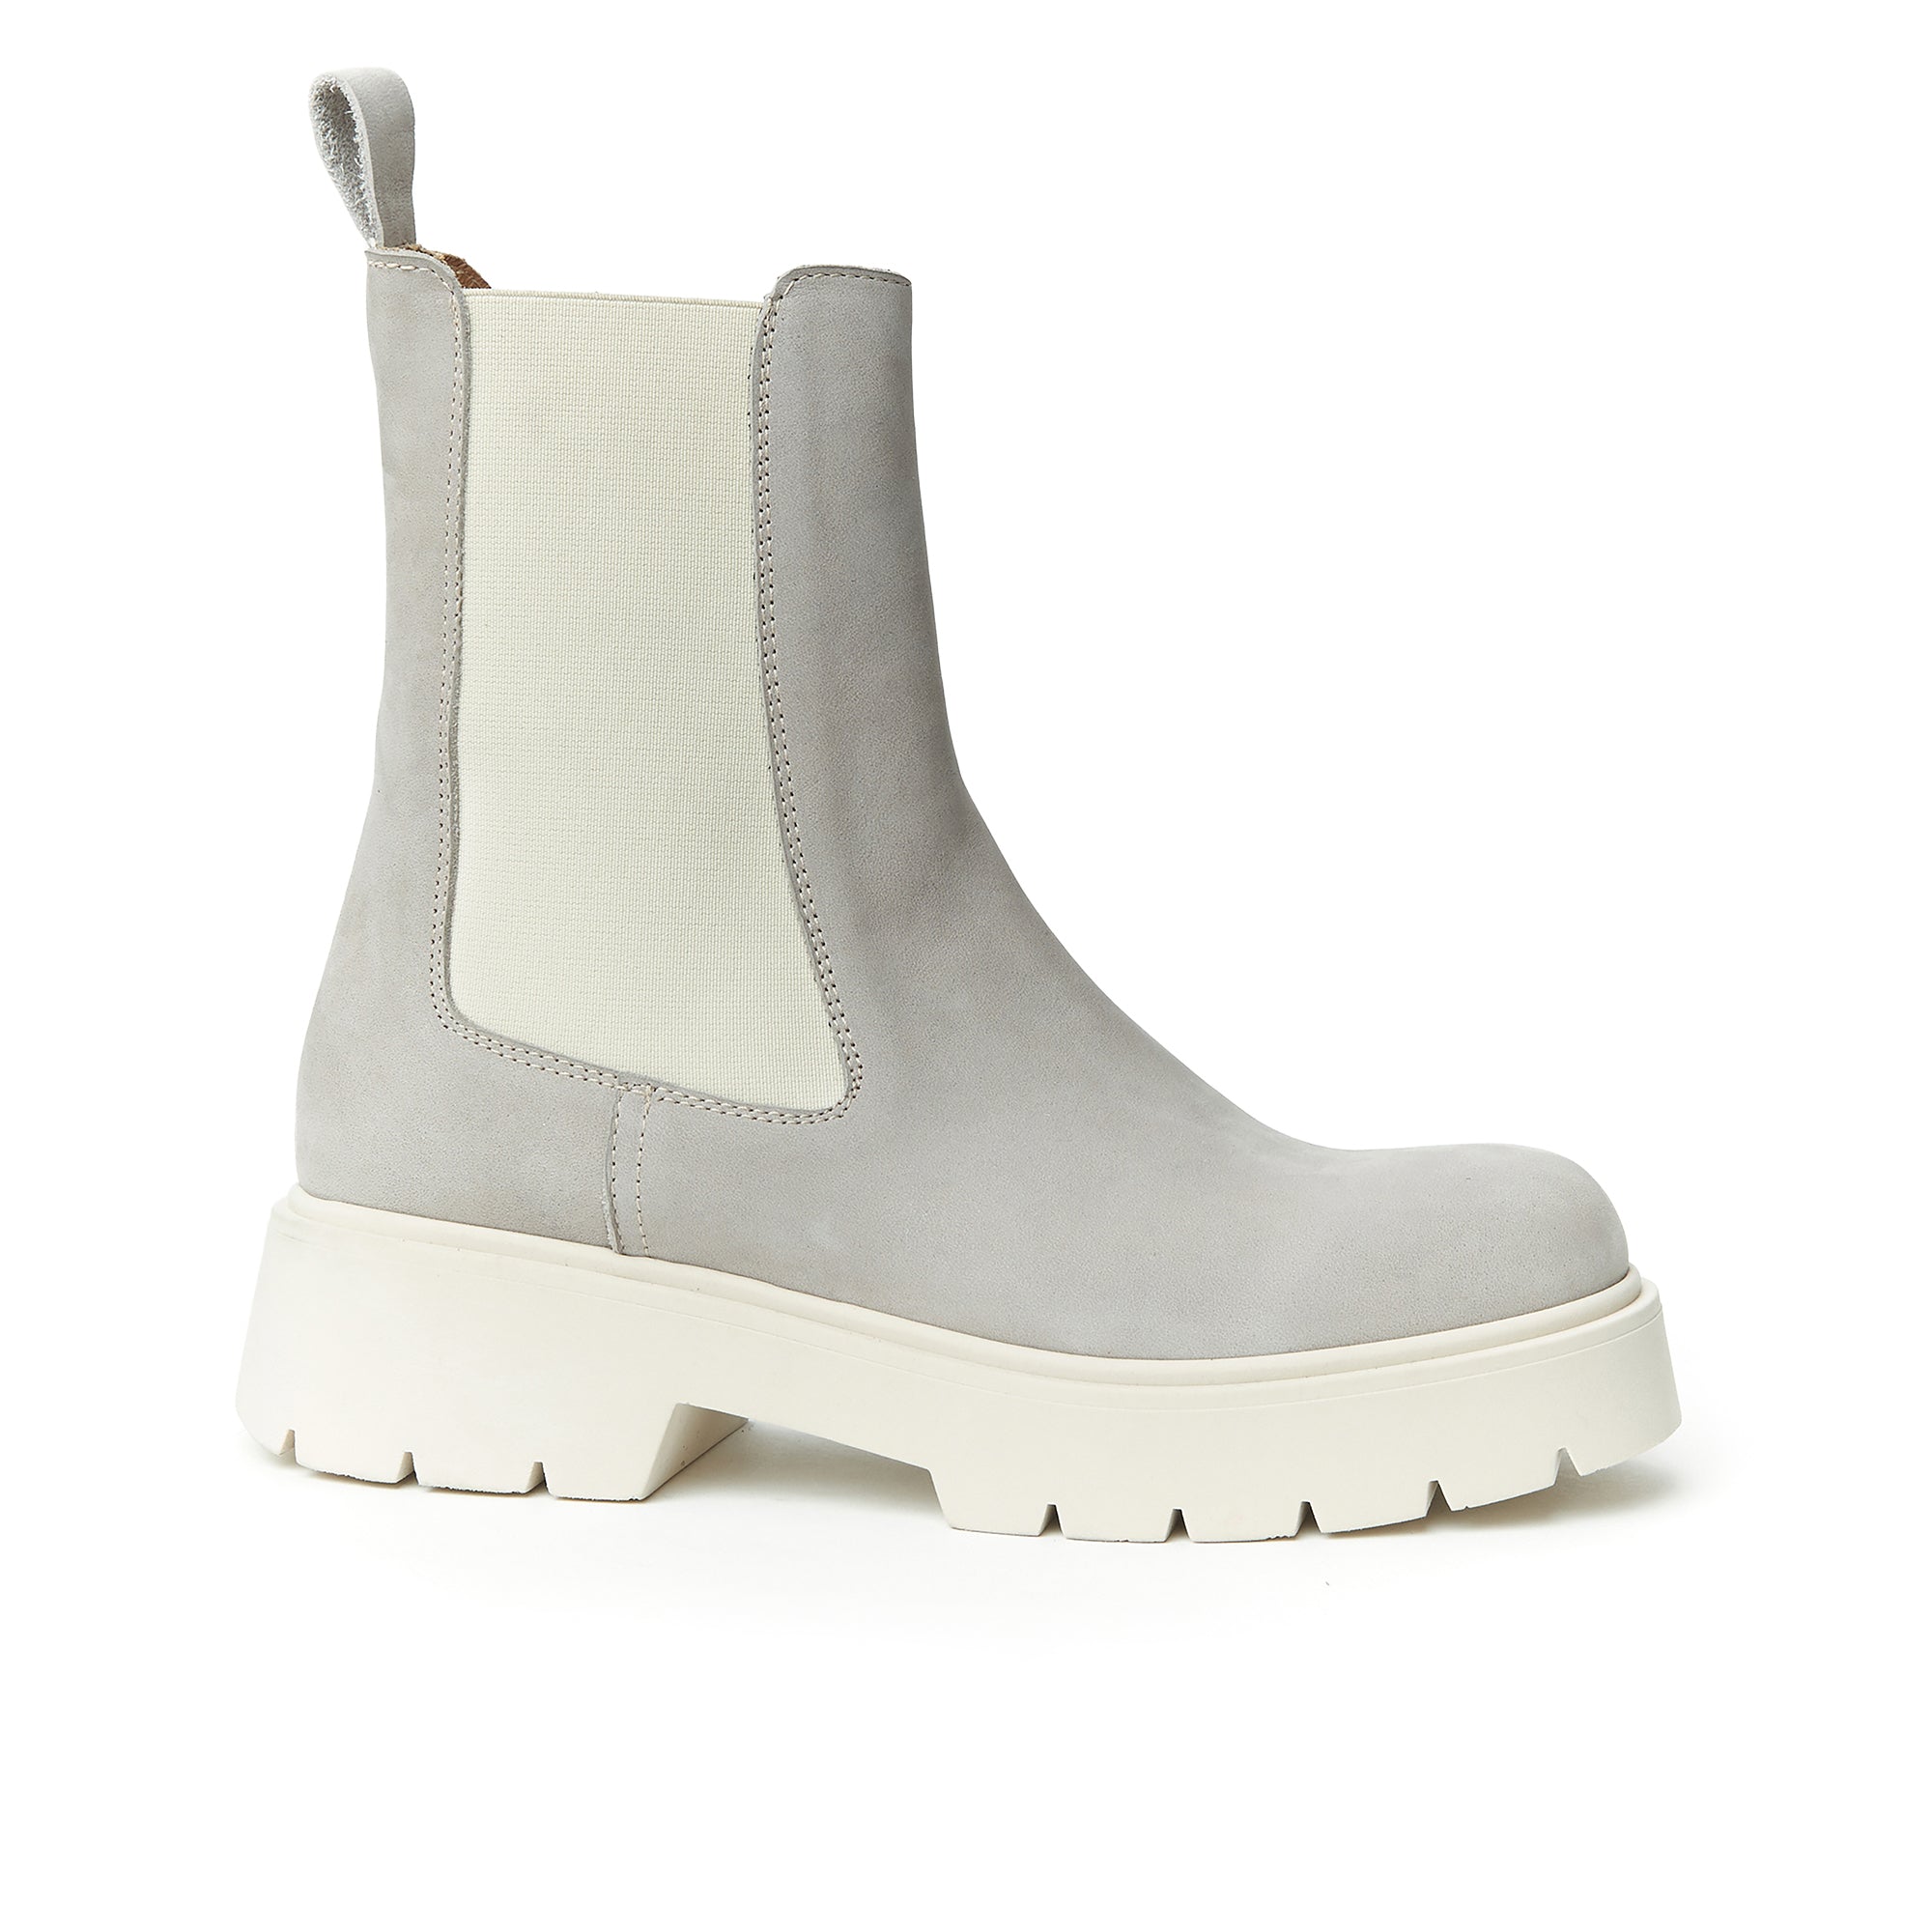 Plain chelsea boot taupe